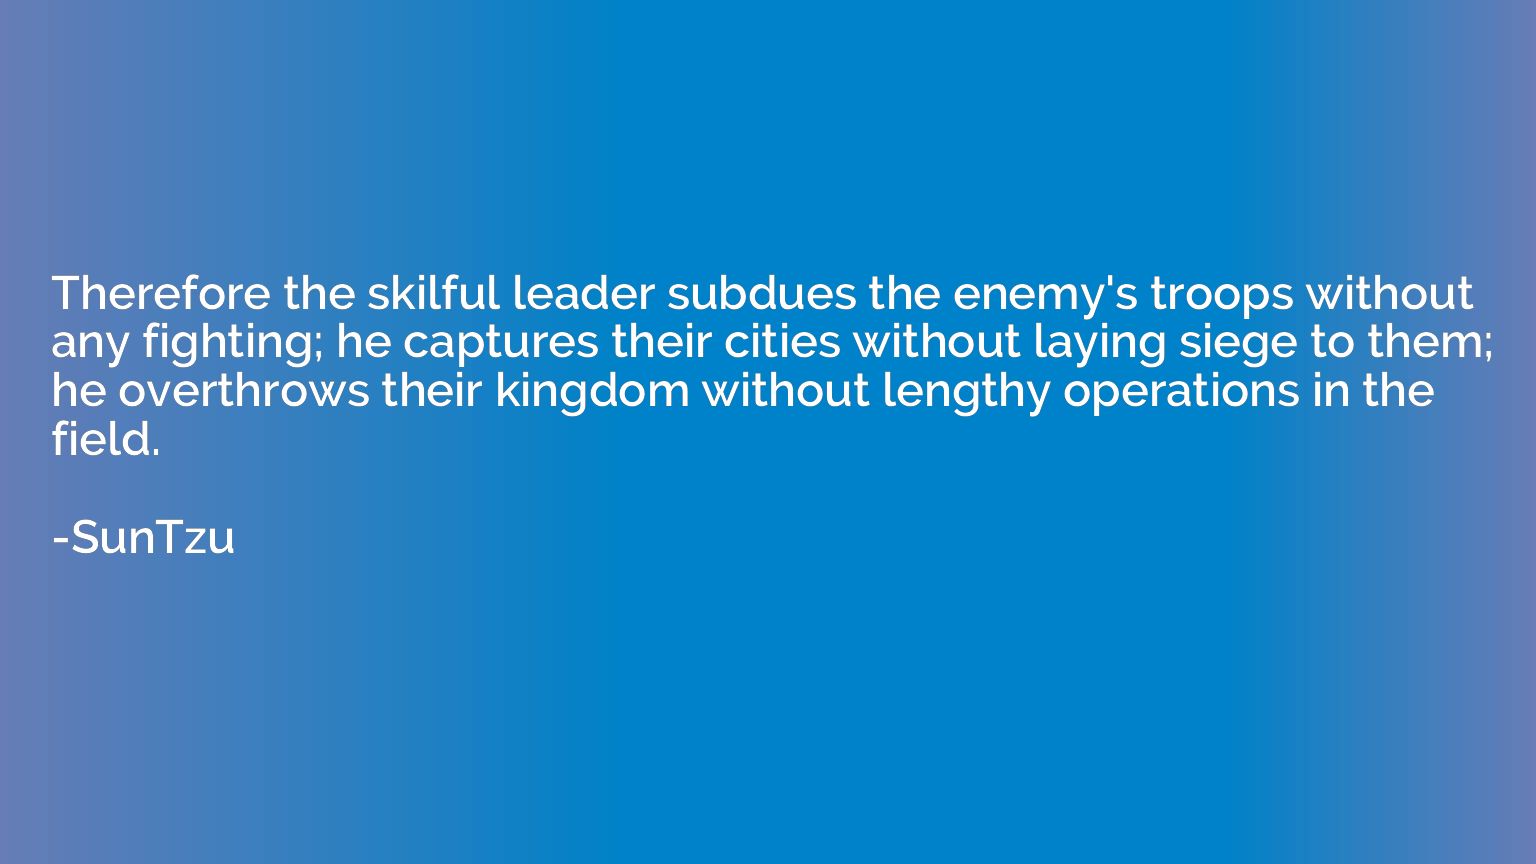 Therefore the skilful leader subdues the enemy's troops with